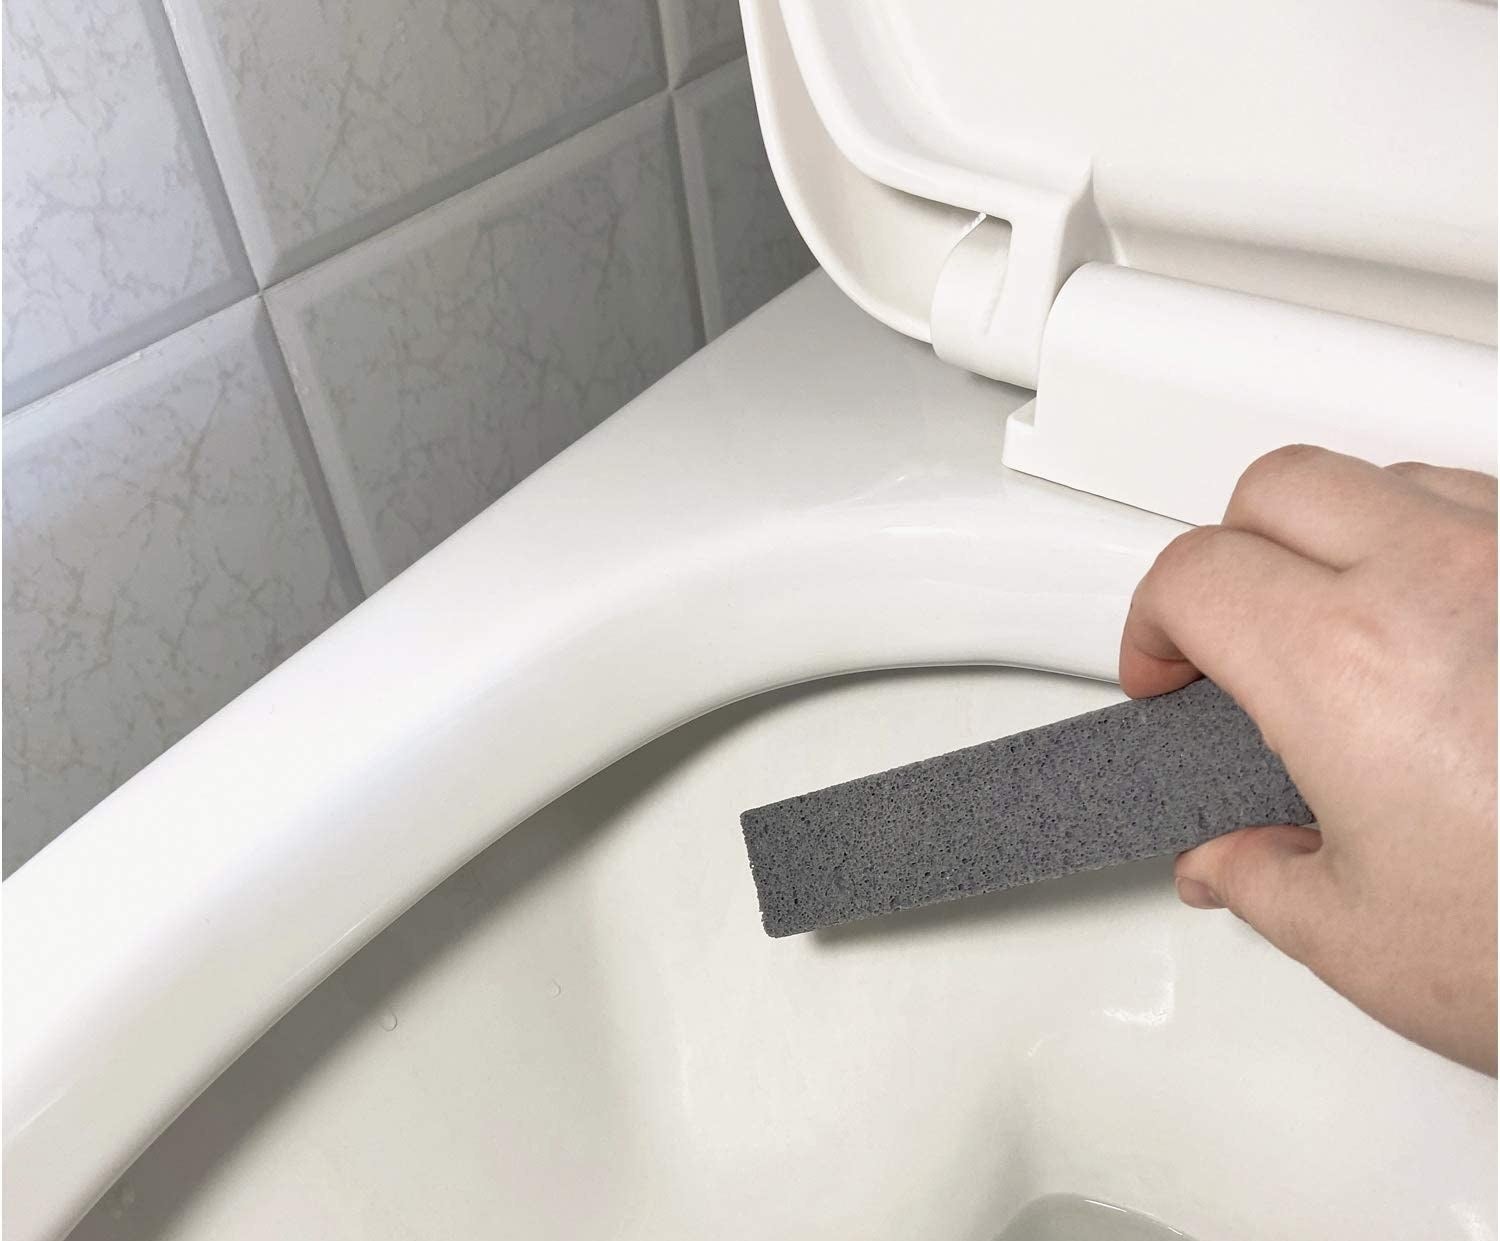 person using a pumice stick to clean a toilet